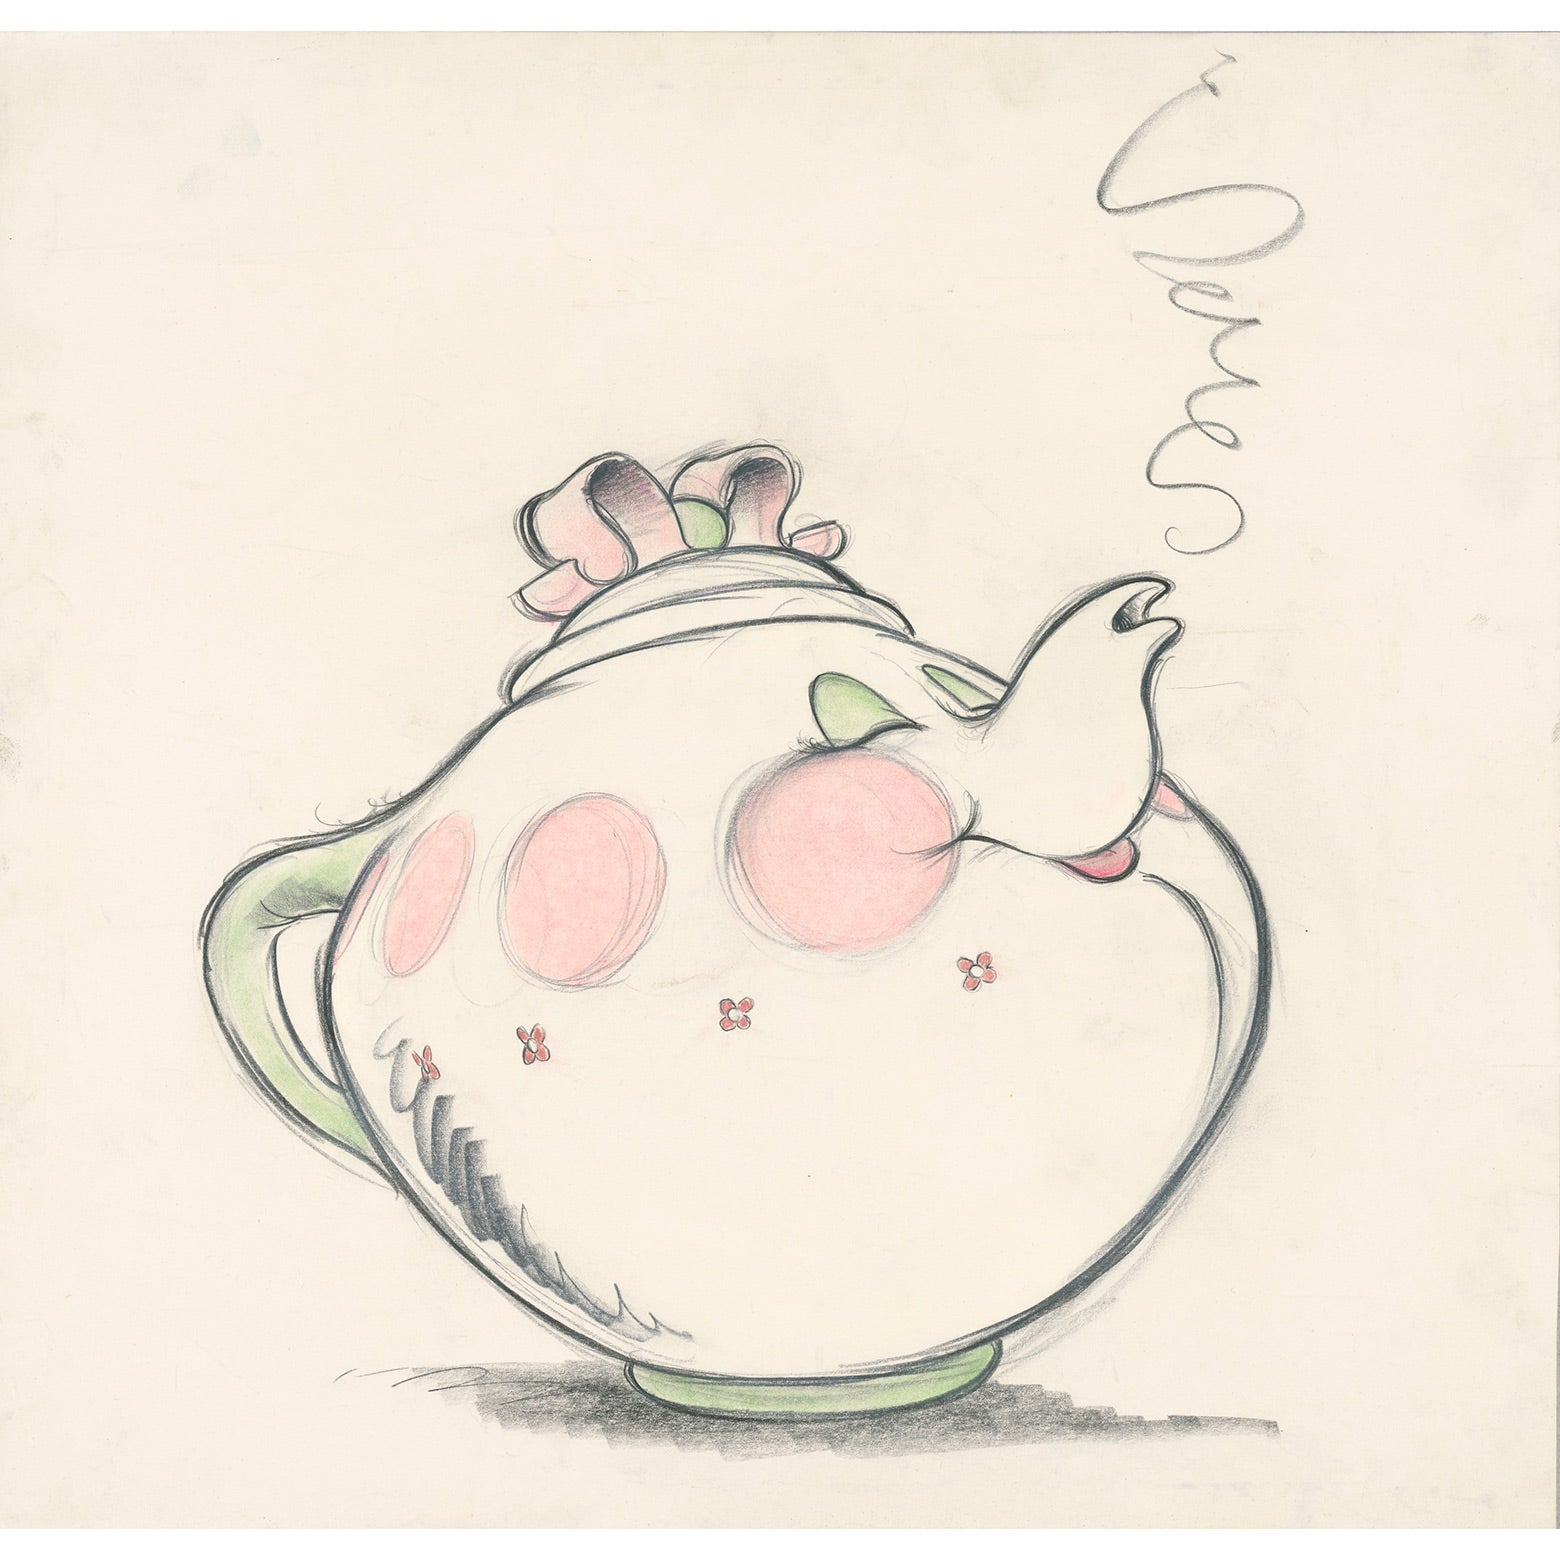 A drawing of the teapot character from the animated Beauty and the Beast